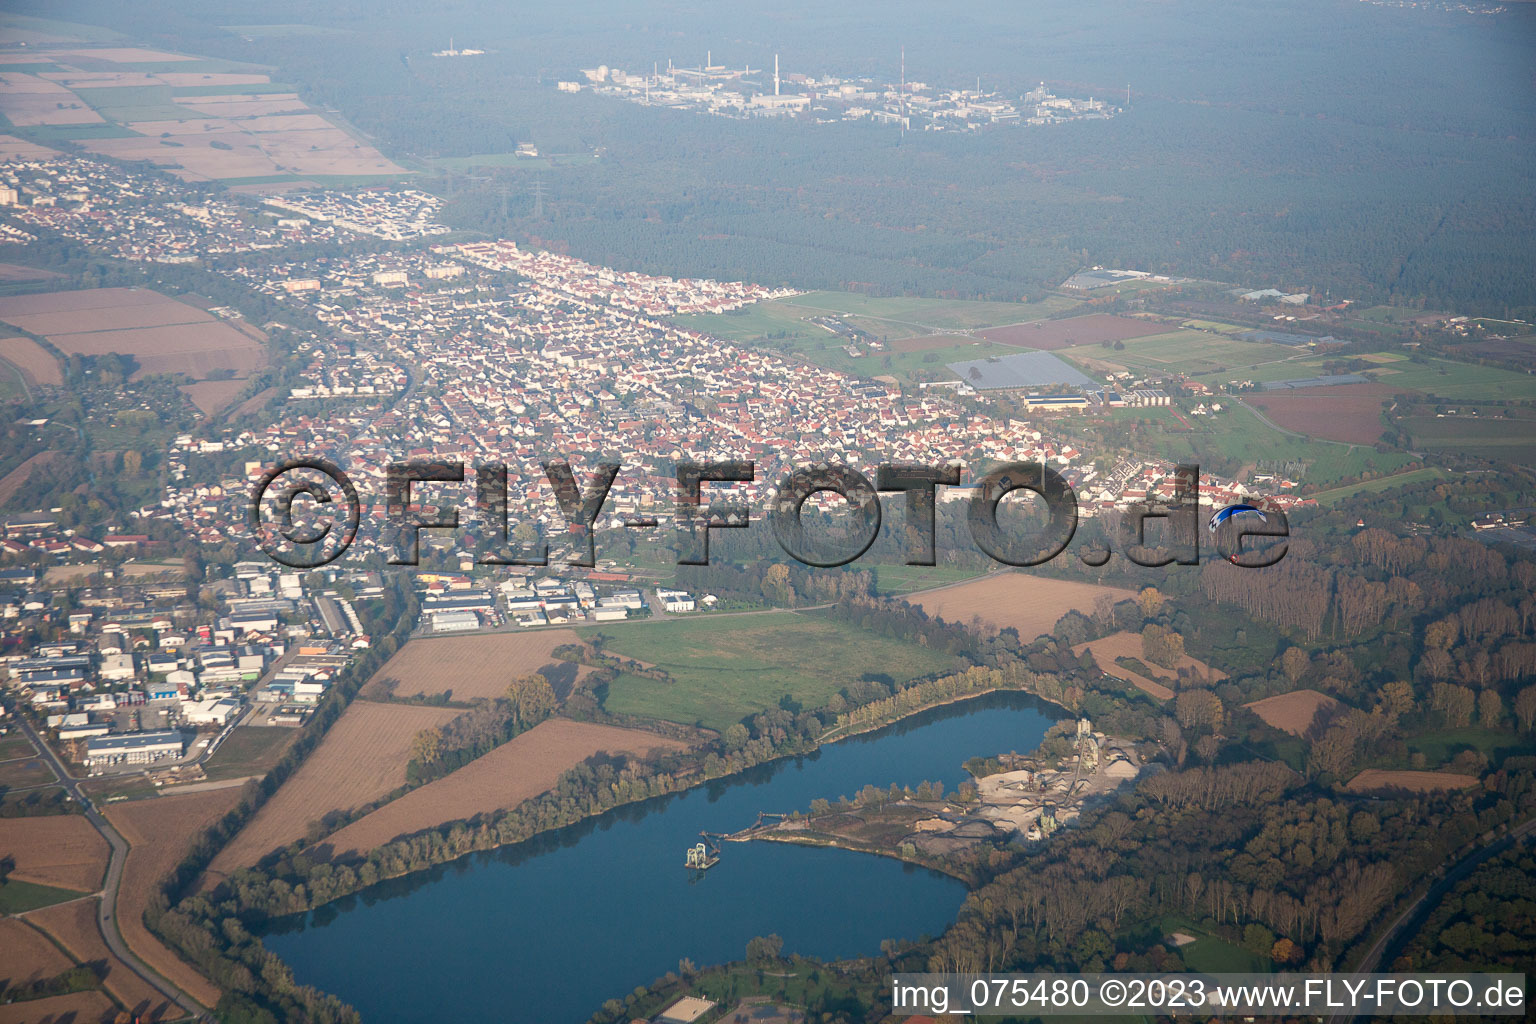 Drone image of District Neureut in Karlsruhe in the state Baden-Wuerttemberg, Germany